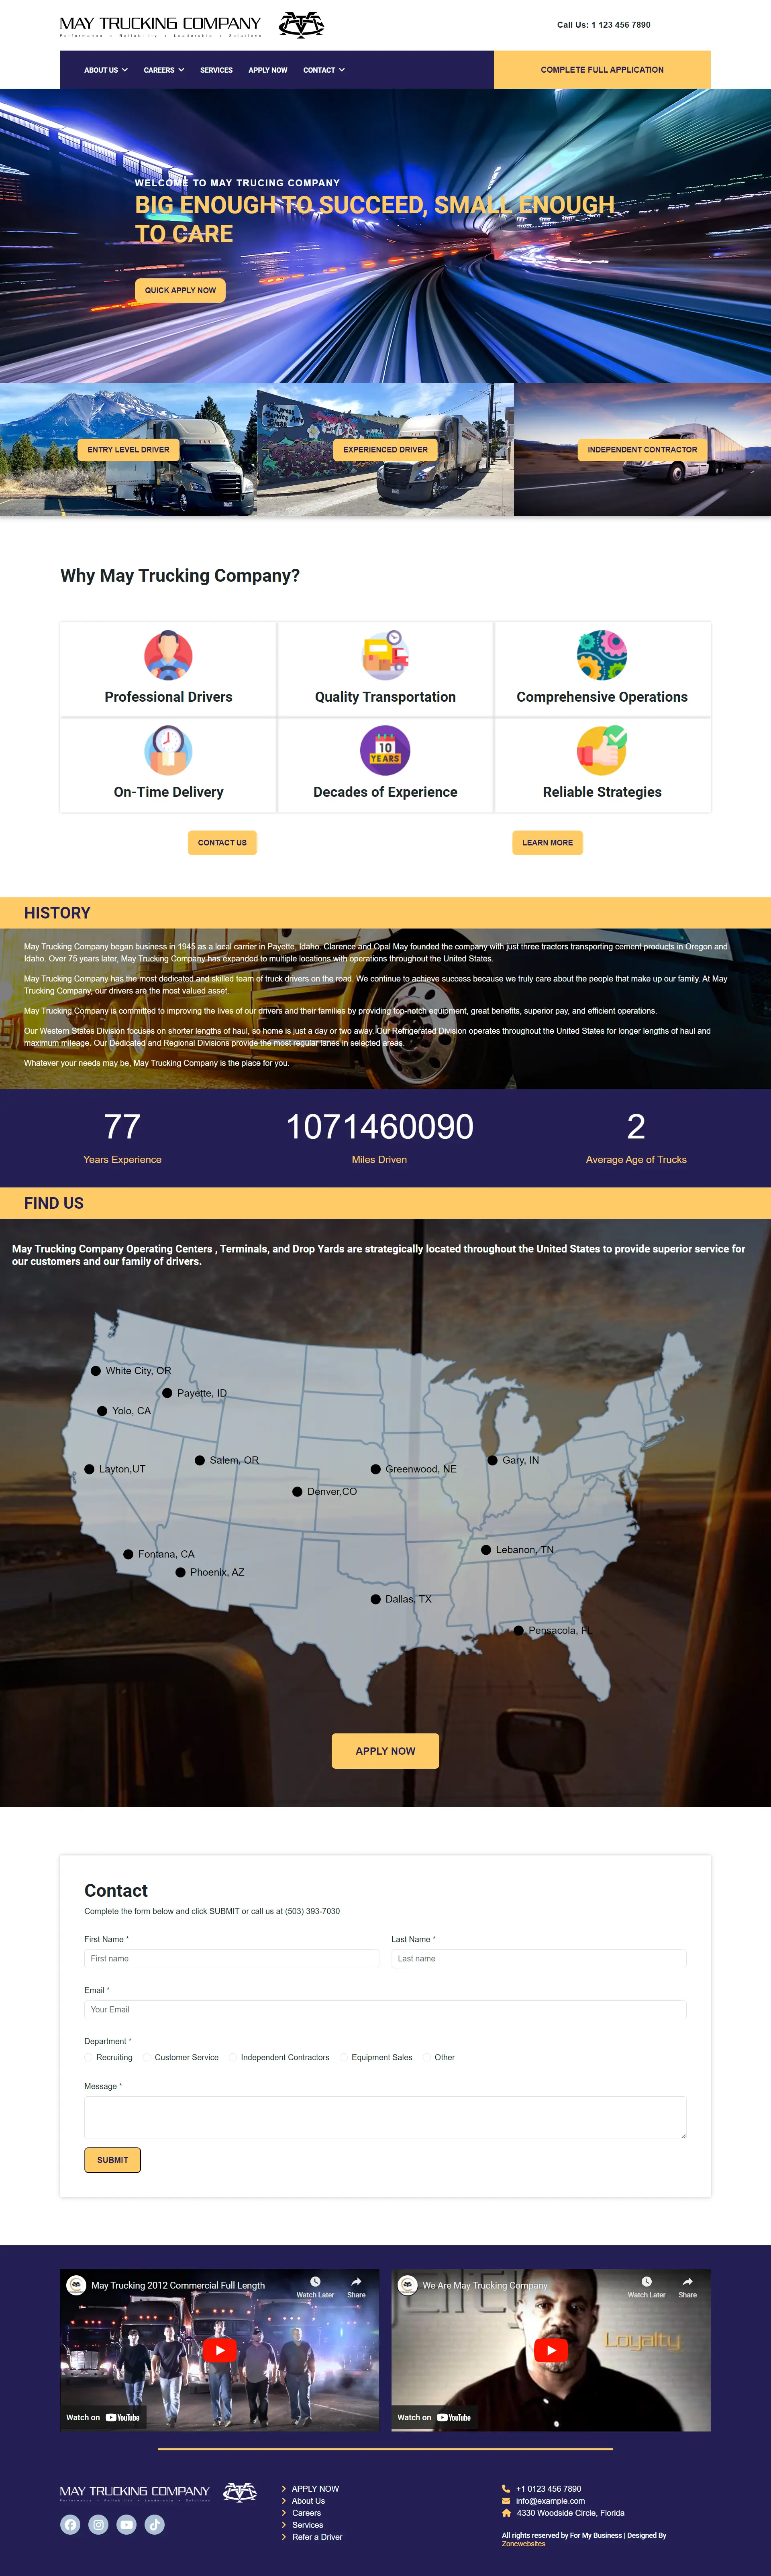 Trucking Company Website Theme for Online Presence